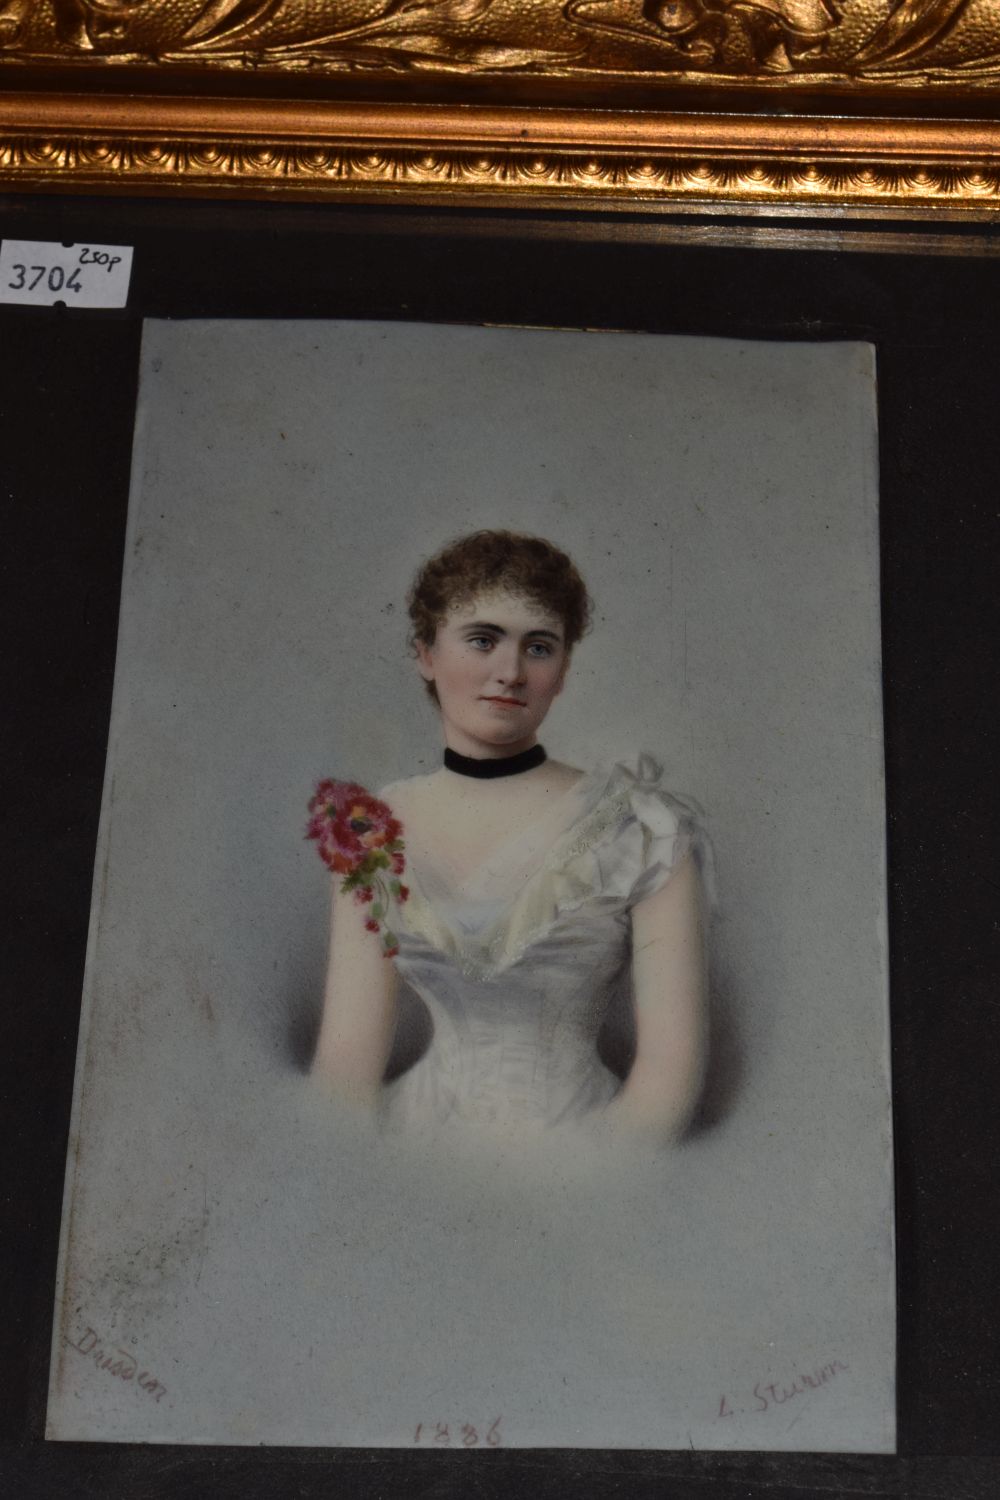 L. Sturn (19th Century German) - Portrait miniature on porcelain - Lady in a white dress, signed and - Image 7 of 11